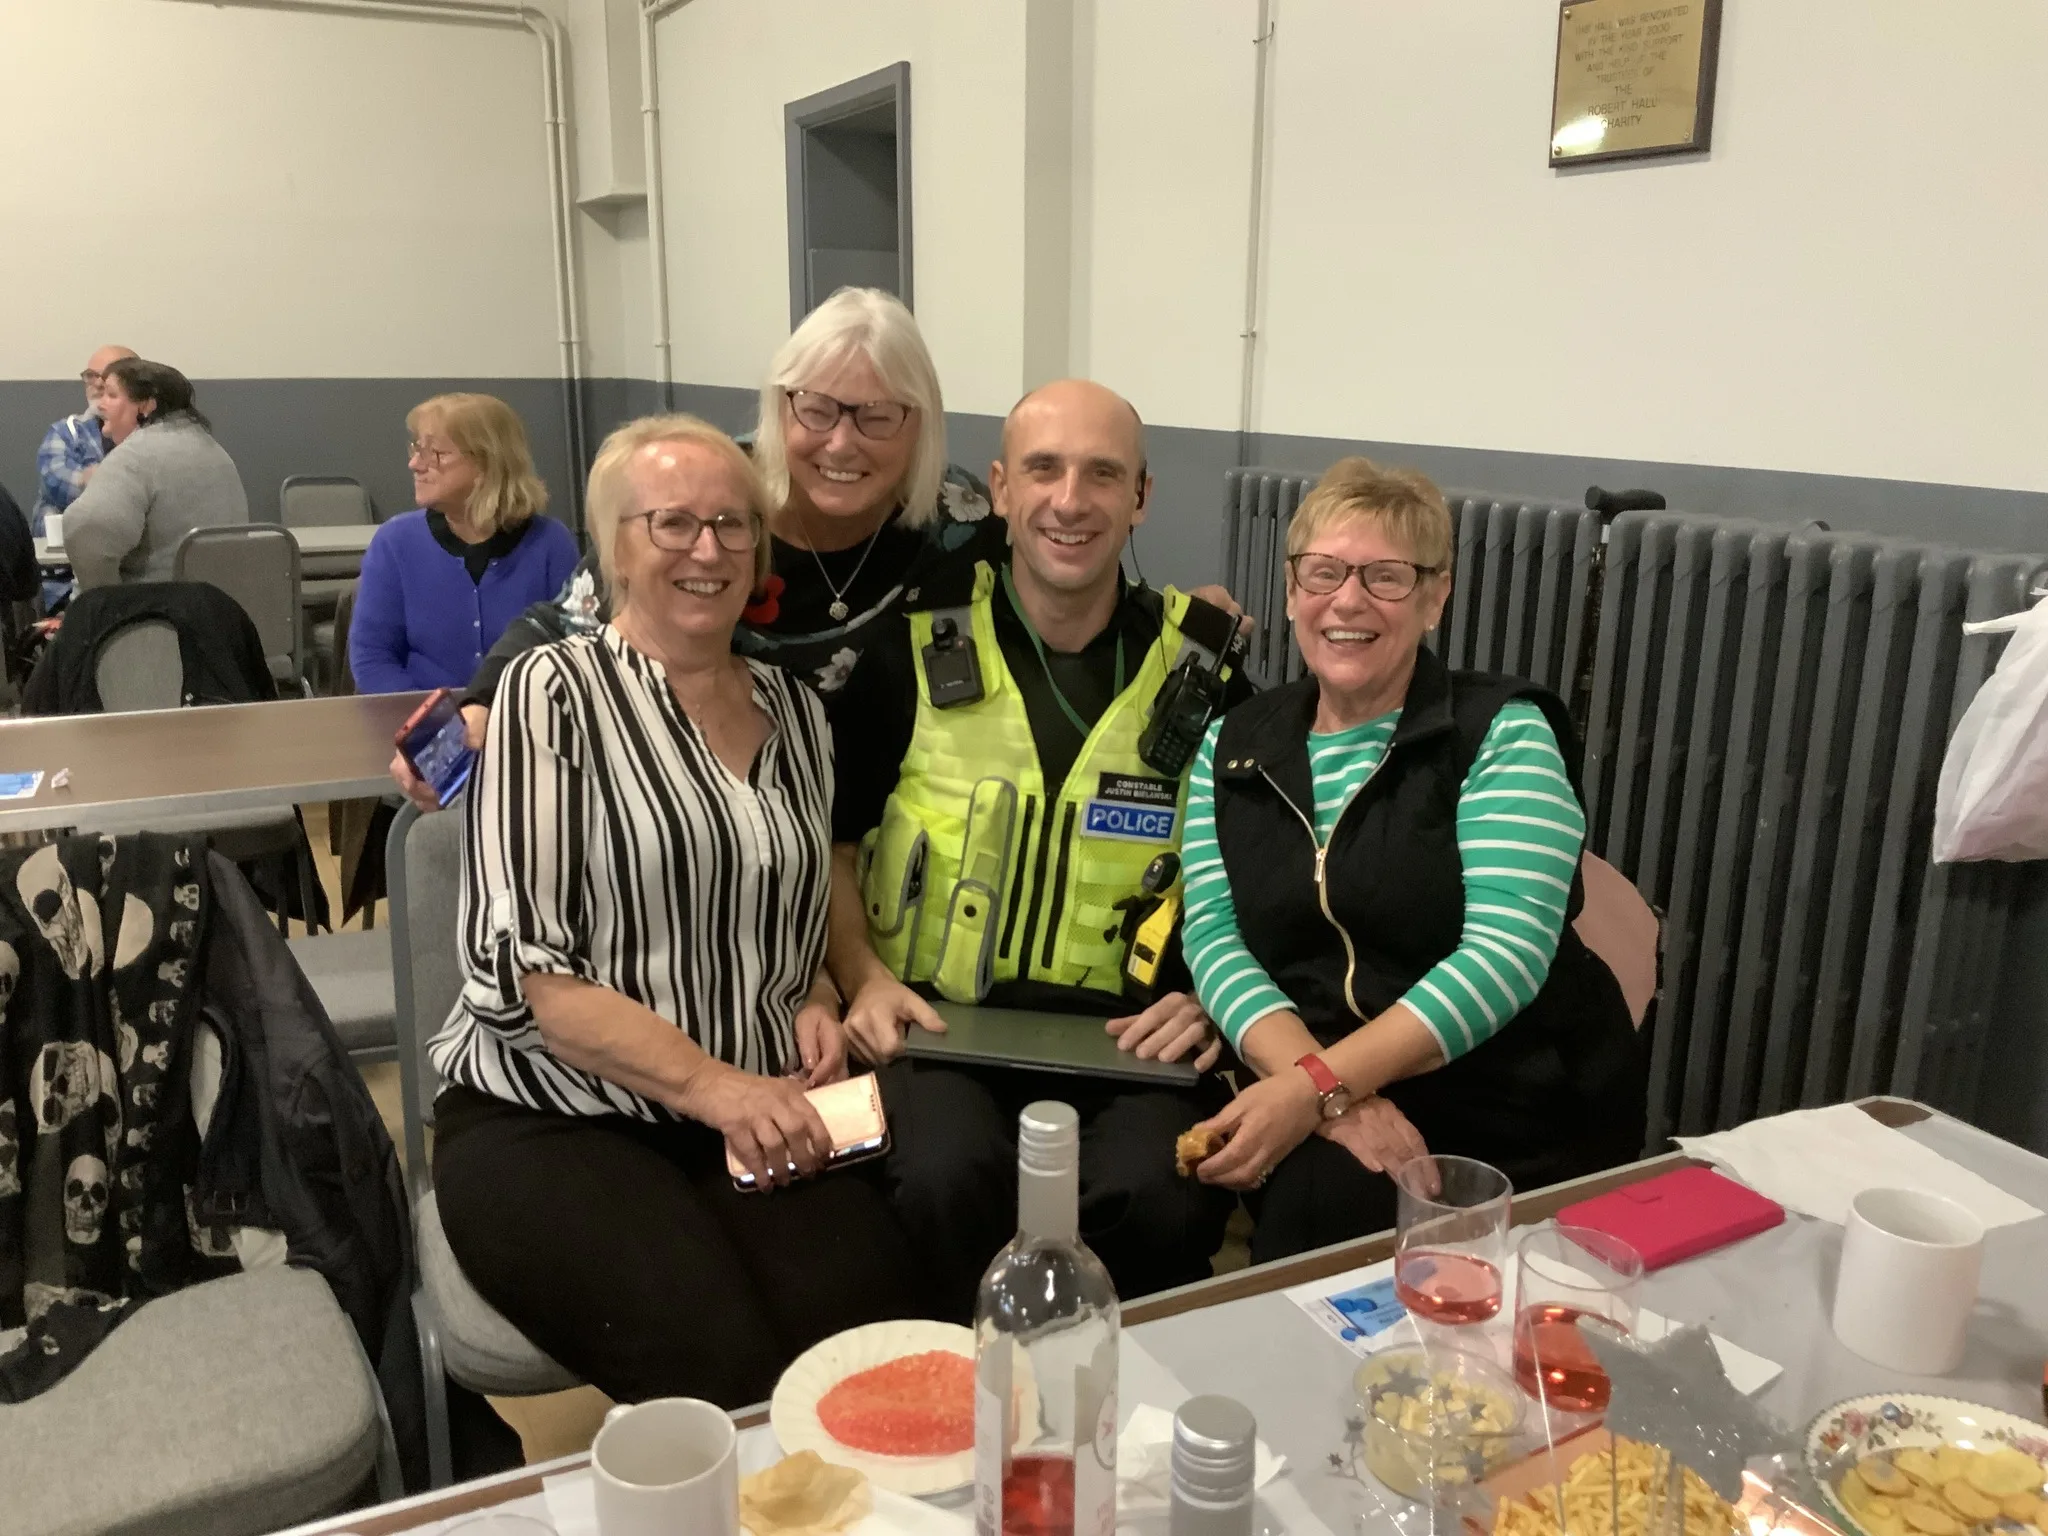 High Sheriff of Cambridgeshire, Dr Bharatkumar Khetani, cut the birthday cake as Walsoken Village Hall Community Coffee Morning celebrated its 2nd anniversary. Local police dropped in for a cuppa and cake. PHOTO: Wisbech Tweet